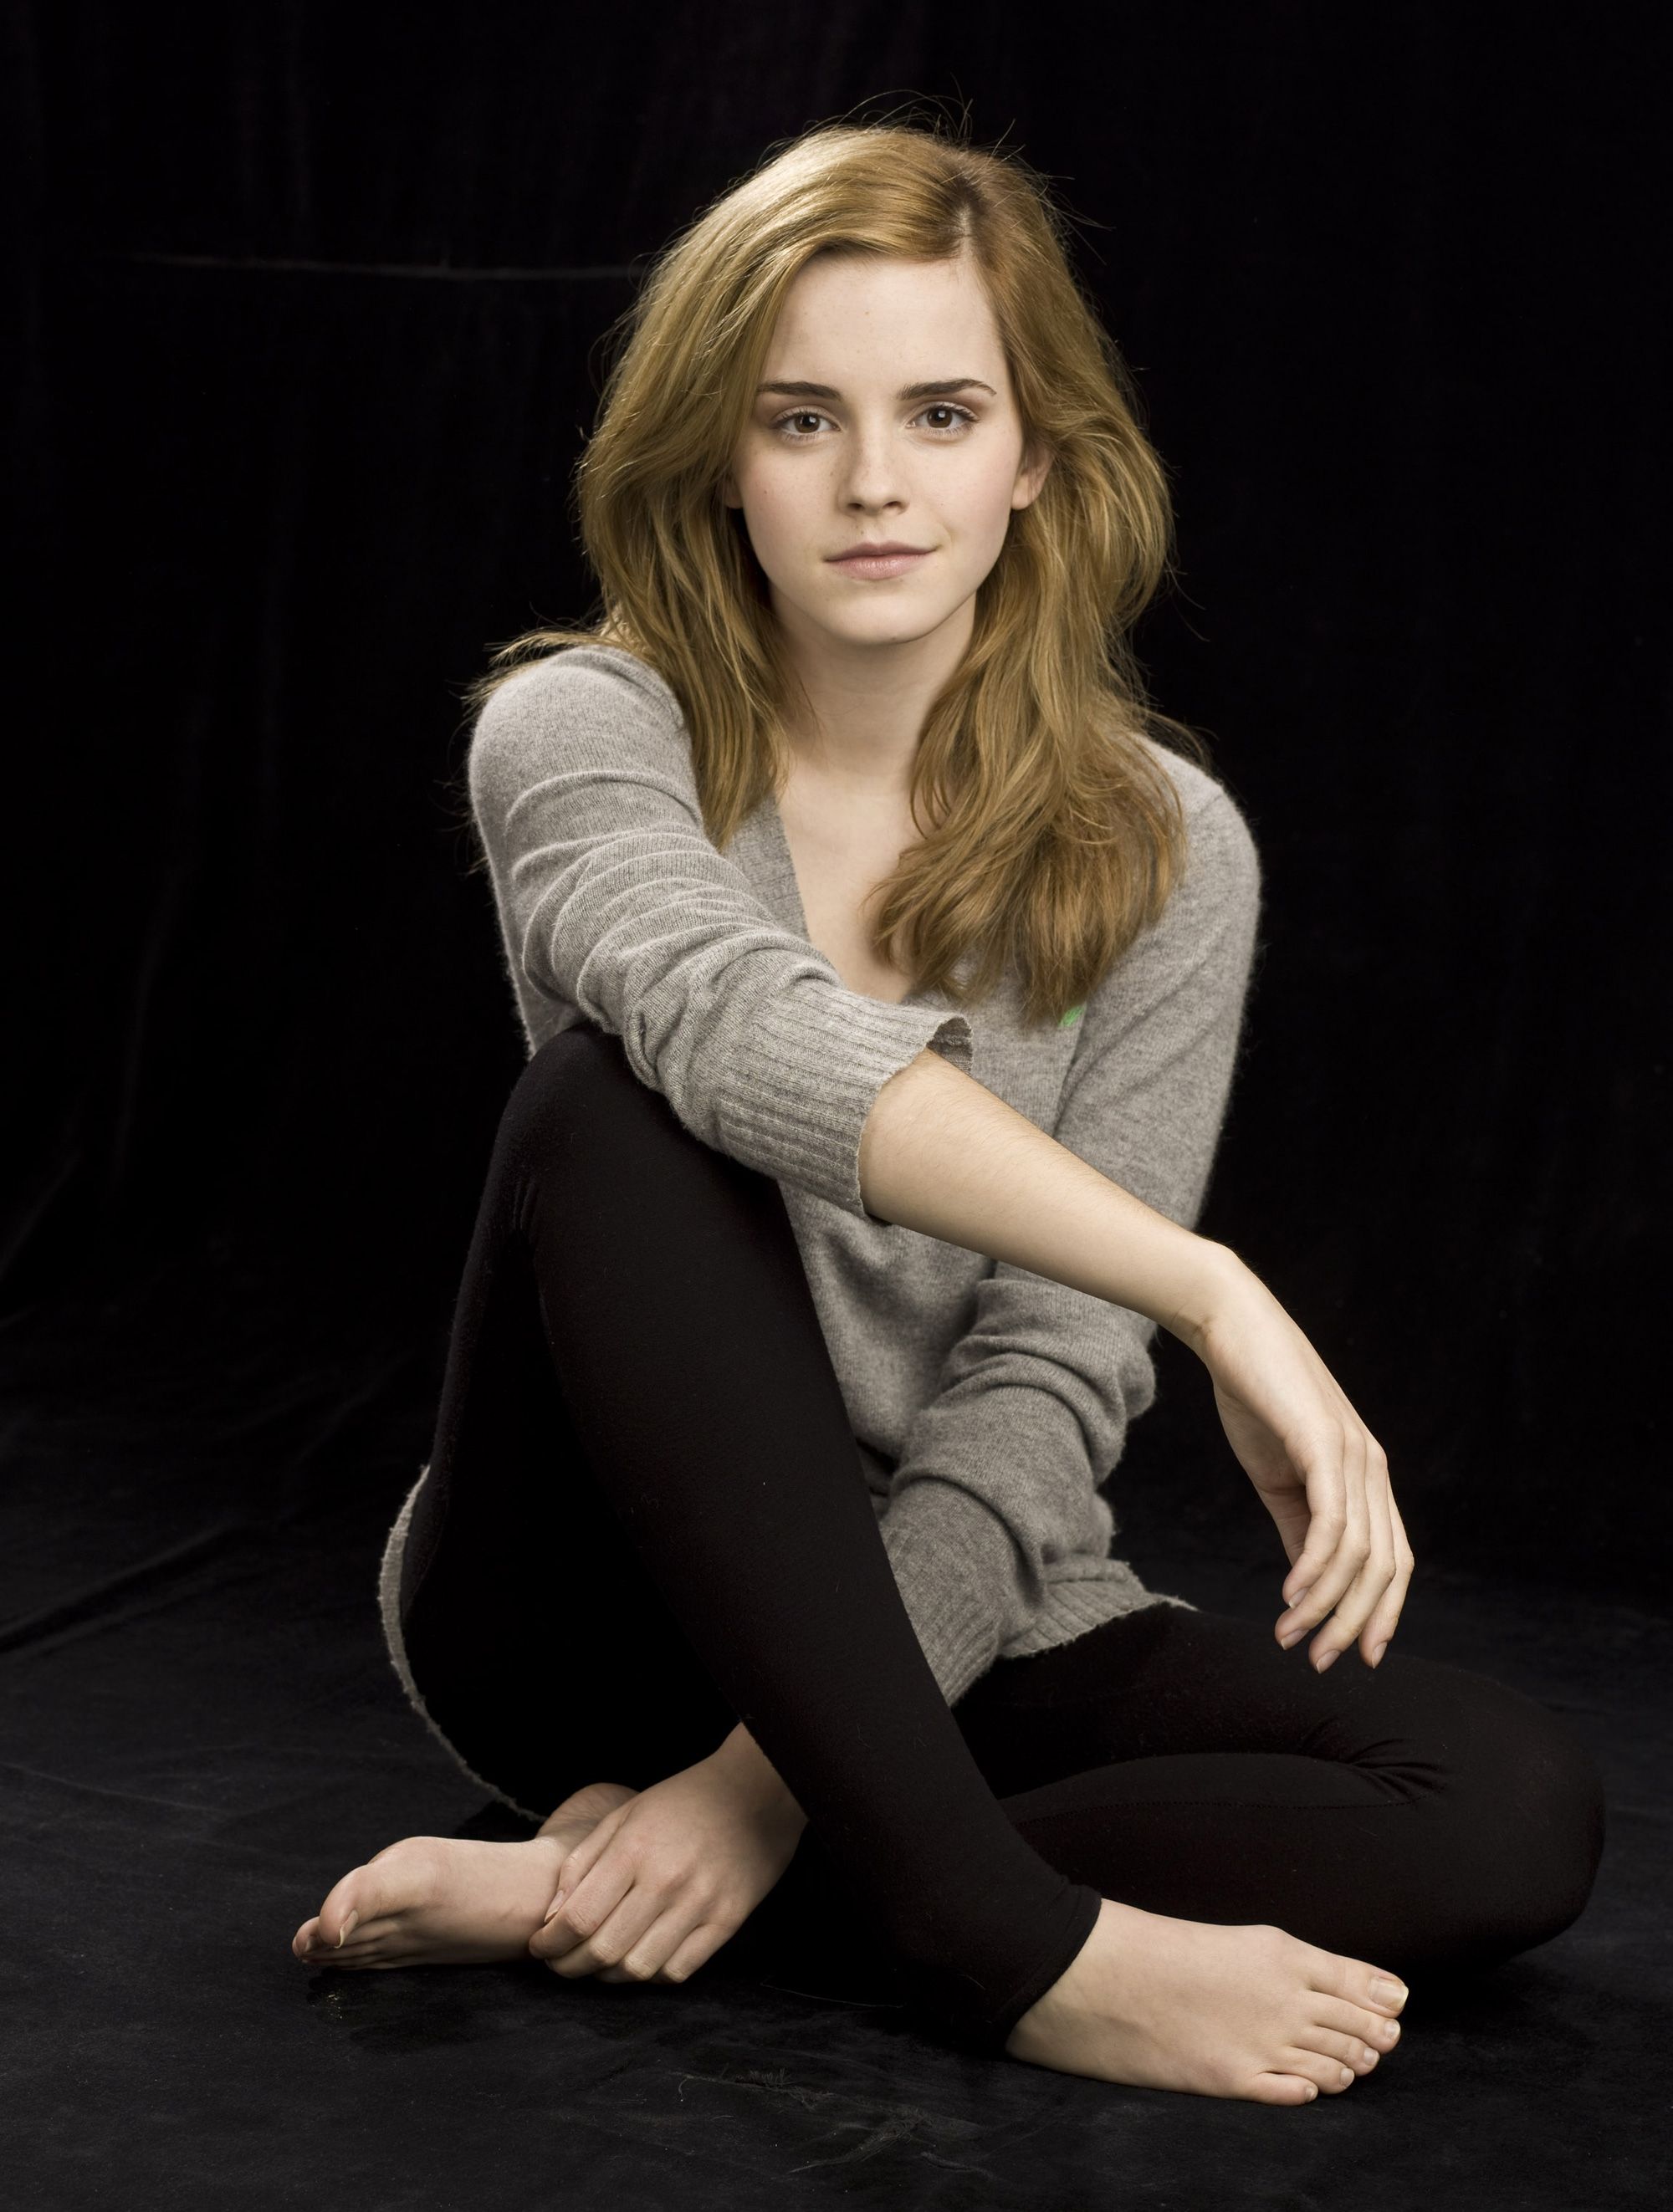 abdullah bey recommends emma watson sexy feet pic